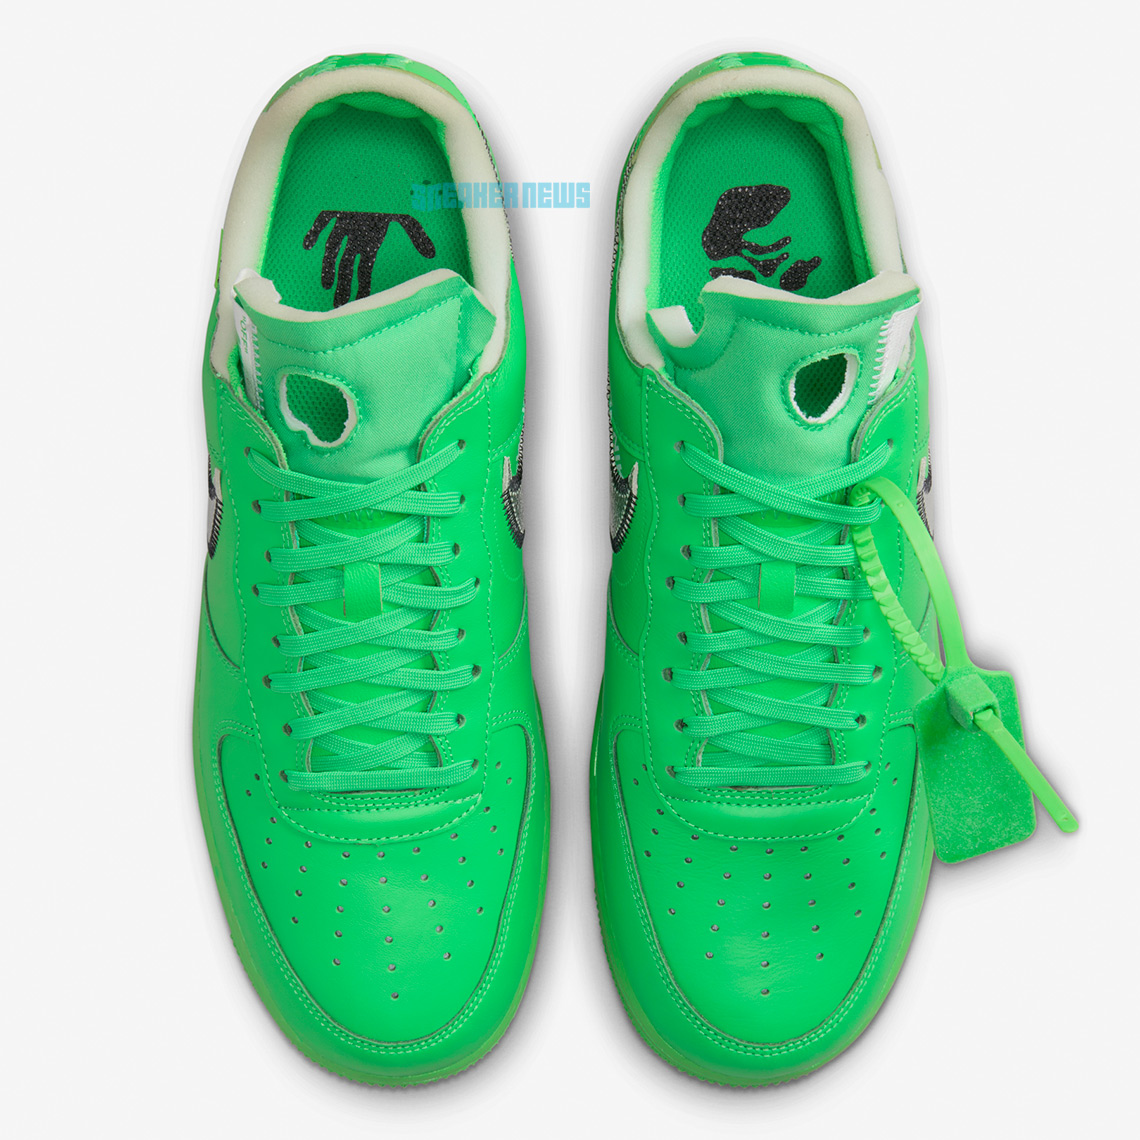 off white air force 1 green dx1419 300 7